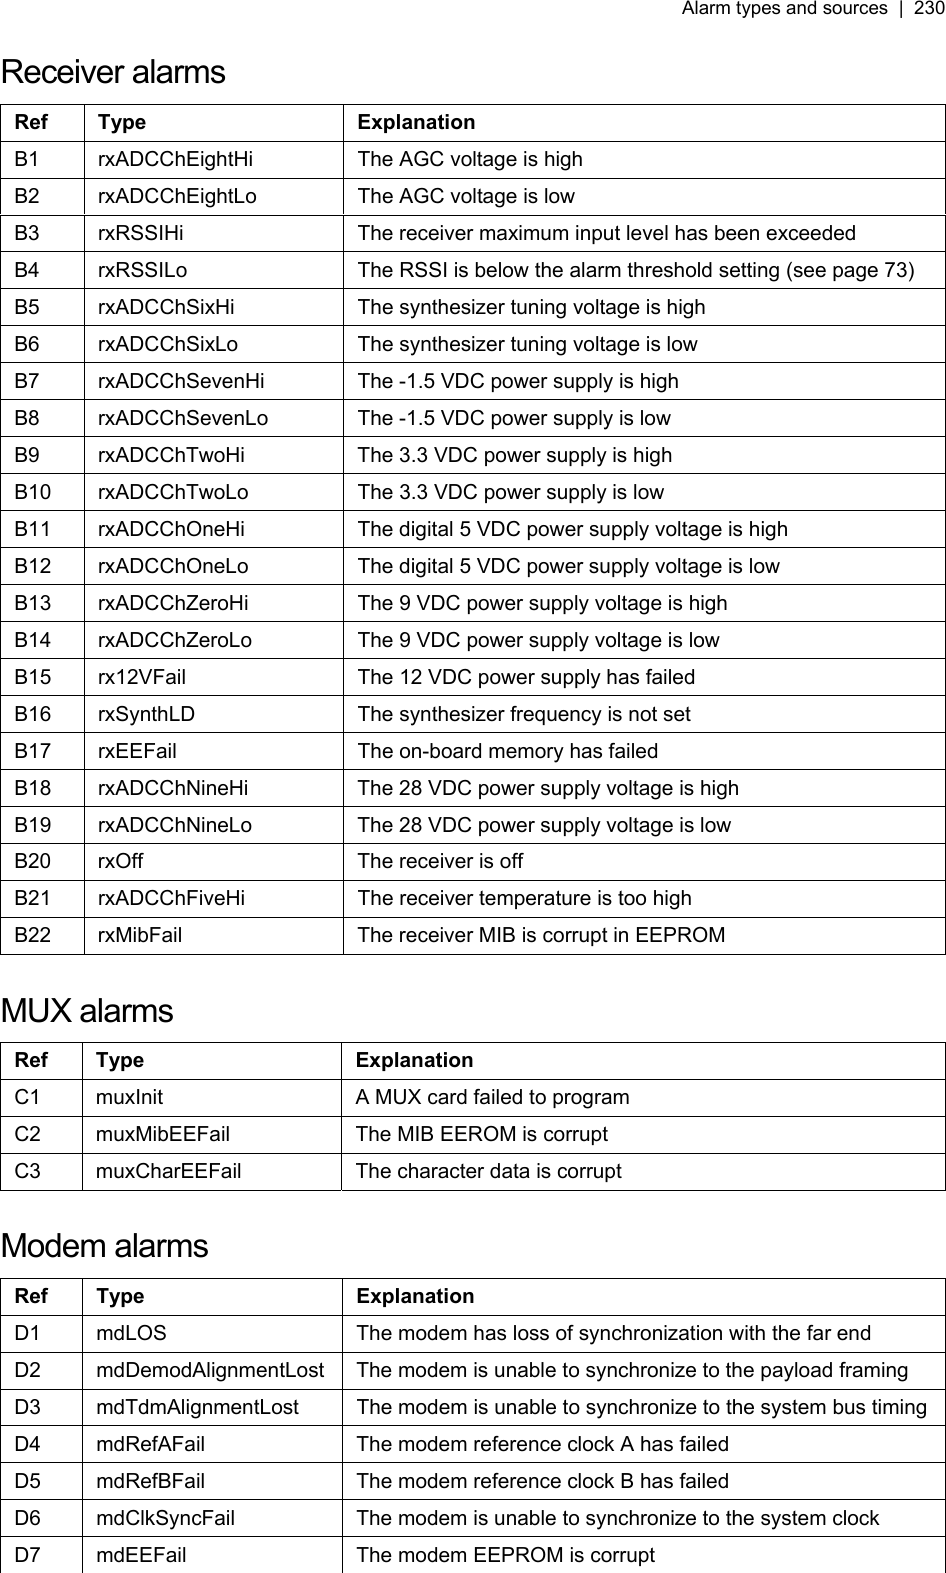 Alarm types and sources  |  230   Receiver alarms Ref Type  Explanation B1  rxADCChEightHi  The AGC voltage is high B2  rxADCChEightLo  The AGC voltage is low B3  rxRSSIHi  The receiver maximum input level has been exceeded B4  rxRSSILo  The RSSI is below the alarm threshold setting (see page 73) B5  rxADCChSixHi  The synthesizer tuning voltage is high B6  rxADCChSixLo  The synthesizer tuning voltage is low B7  rxADCChSevenHi  The -1.5 VDC power supply is high B8  rxADCChSevenLo  The -1.5 VDC power supply is low B9  rxADCChTwoHi  The 3.3 VDC power supply is high B10 rxADCChTwoLo  The 3.3 VDC power supply is low B11  rxADCChOneHi  The digital 5 VDC power supply voltage is high B12  rxADCChOneLo  The digital 5 VDC power supply voltage is low B13  rxADCChZeroHi  The 9 VDC power supply voltage is high B14  rxADCChZeroLo  The 9 VDC power supply voltage is low B15  rx12VFail  The 12 VDC power supply has failed B16 rxSynthLD  The synthesizer frequency is not set B17  rxEEFail  The on-board memory has failed B18  rxADCChNineHi  The 28 VDC power supply voltage is high B19  rxADCChNineLo  The 28 VDC power supply voltage is low B20  rxOff  The receiver is off B21 rxADCChFiveHi  The receiver temperature is too high B22  rxMibFail  The receiver MIB is corrupt in EEPROM  MUX alarms Ref Type  Explanation C1  muxInit  A MUX card failed to program C2  muxMibEEFail  The MIB EEROM is corrupt C3  muxCharEEFail  The character data is corrupt  Modem alarms Ref Type  Explanation D1  mdLOS  The modem has loss of synchronization with the far end D2  mdDemodAlignmentLost  The modem is unable to synchronize to the payload framing D3  mdTdmAlignmentLost  The modem is unable to synchronize to the system bus timing D4  mdRefAFail  The modem reference clock A has failed D5  mdRefBFail  The modem reference clock B has failed D6  mdClkSyncFail  The modem is unable to synchronize to the system clock D7  mdEEFail  The modem EEPROM is corrupt  